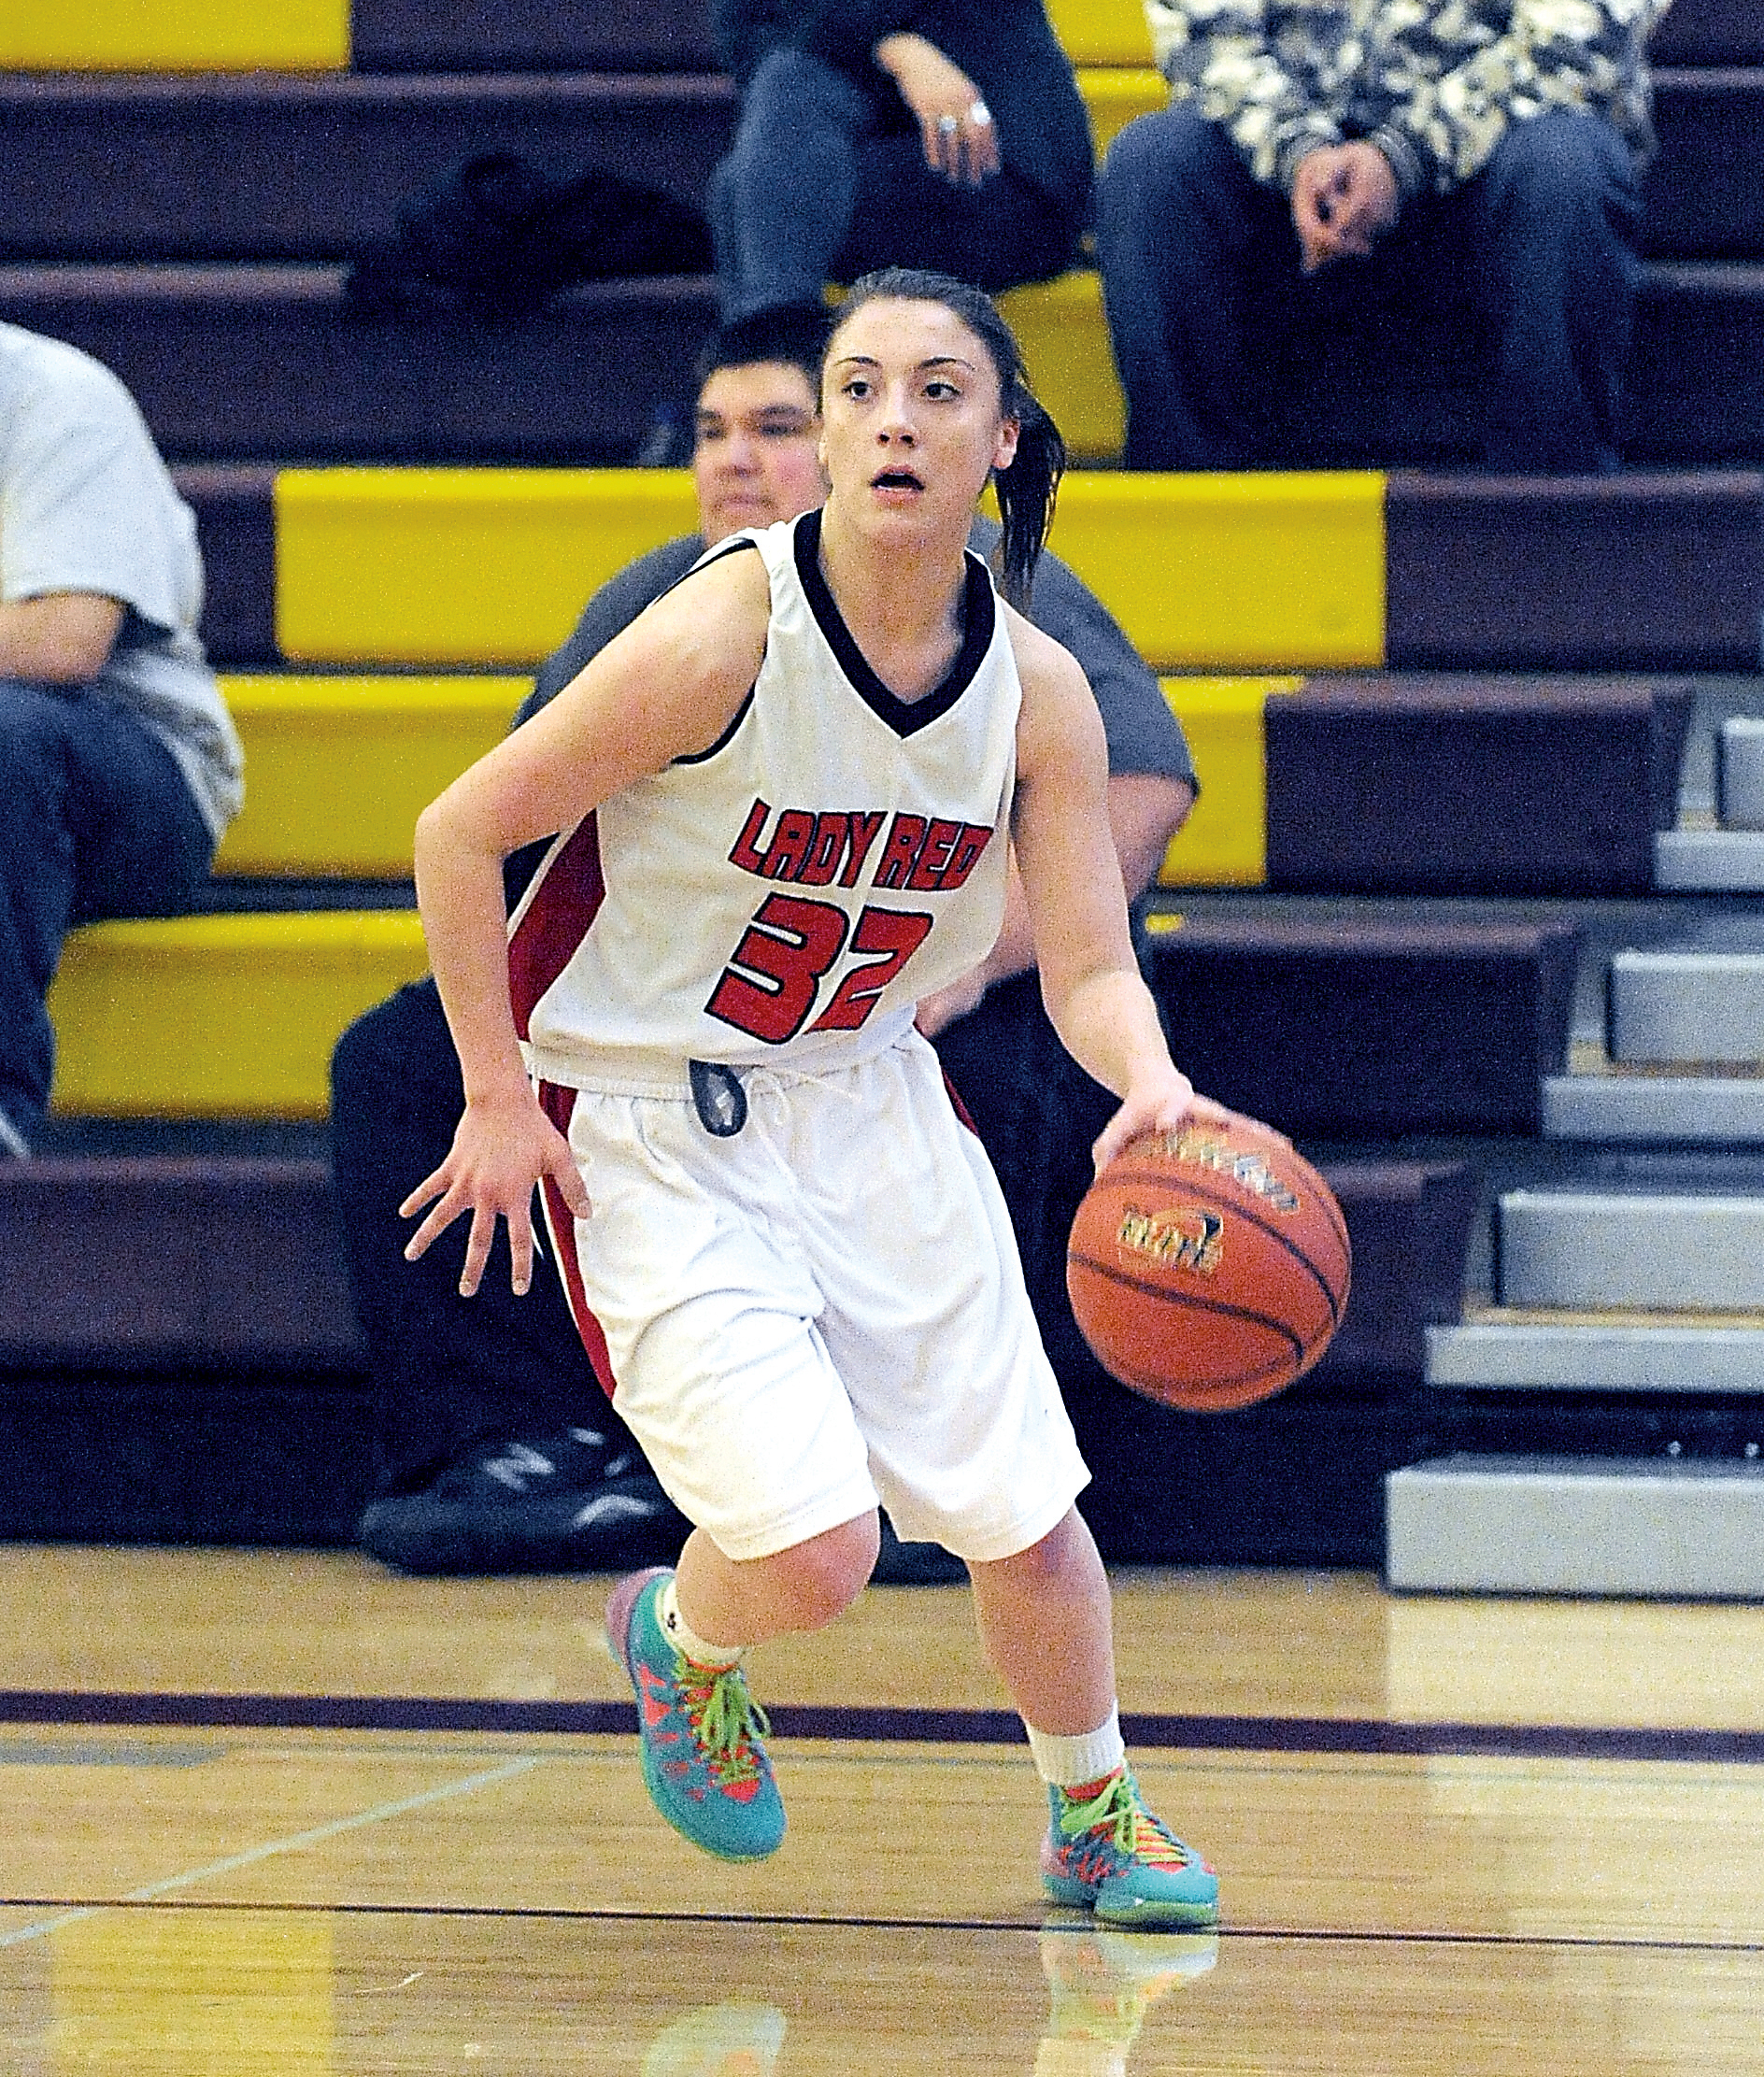 Neah Bay senior Cierra Moss was named to the All-State girls basketball team by The Associated Press. Lonnie Archibald/for Peninsula Daily News